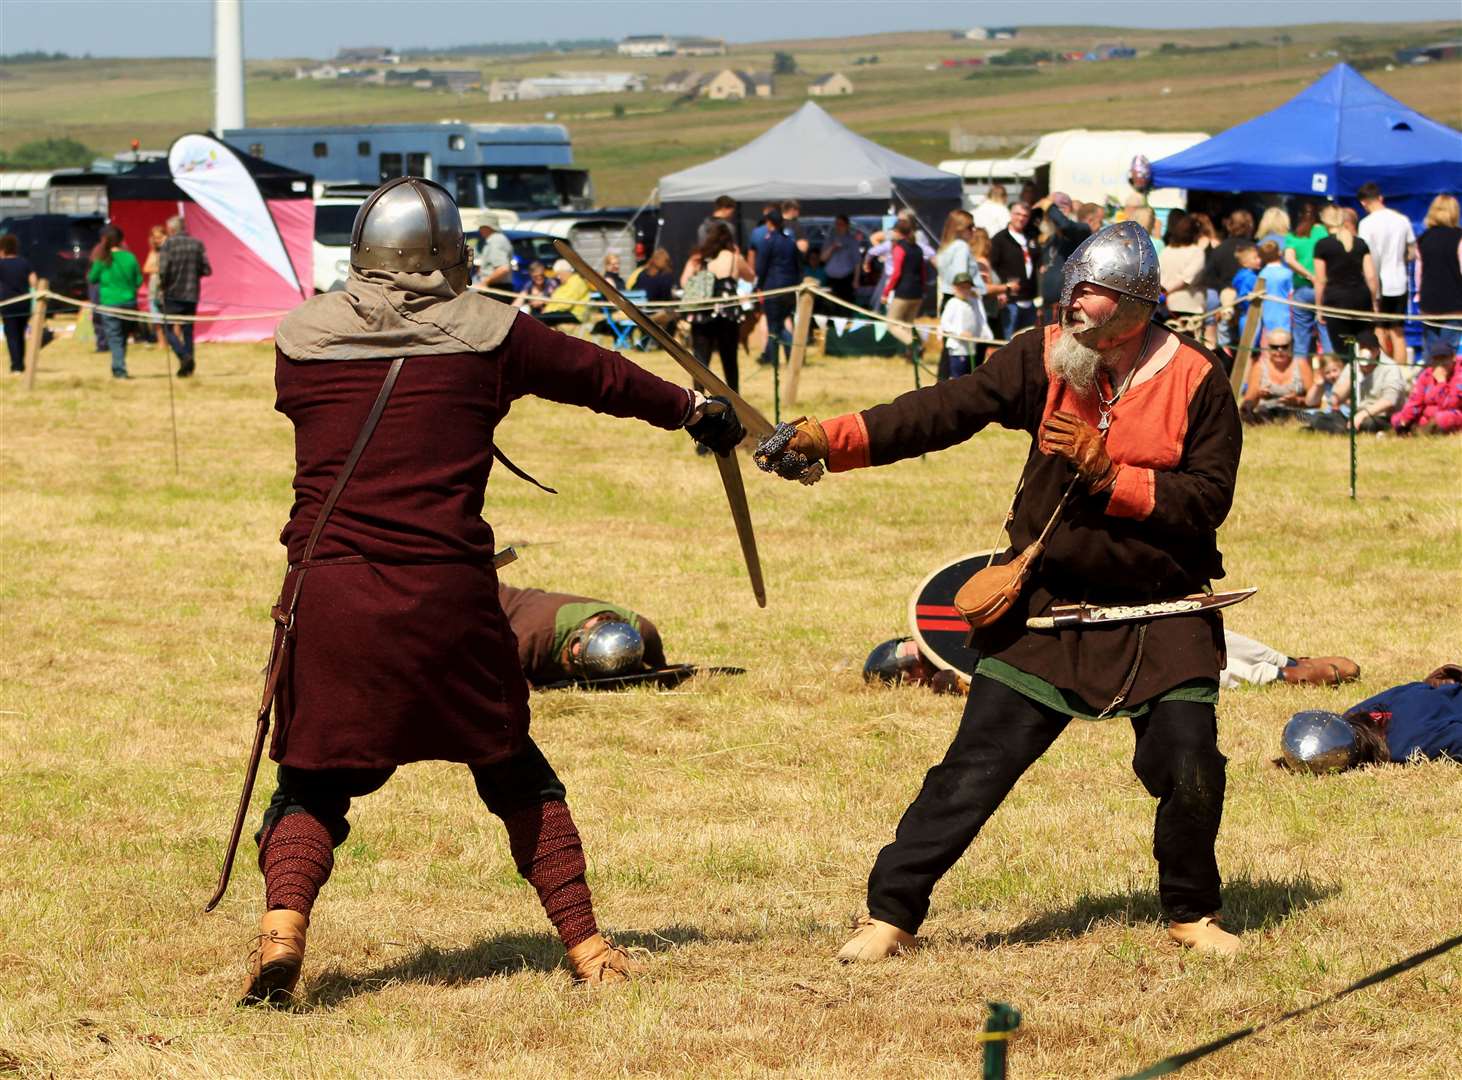 Glasgow Vikings battling it out at the Latheron Show. Picture: Alan Hendry